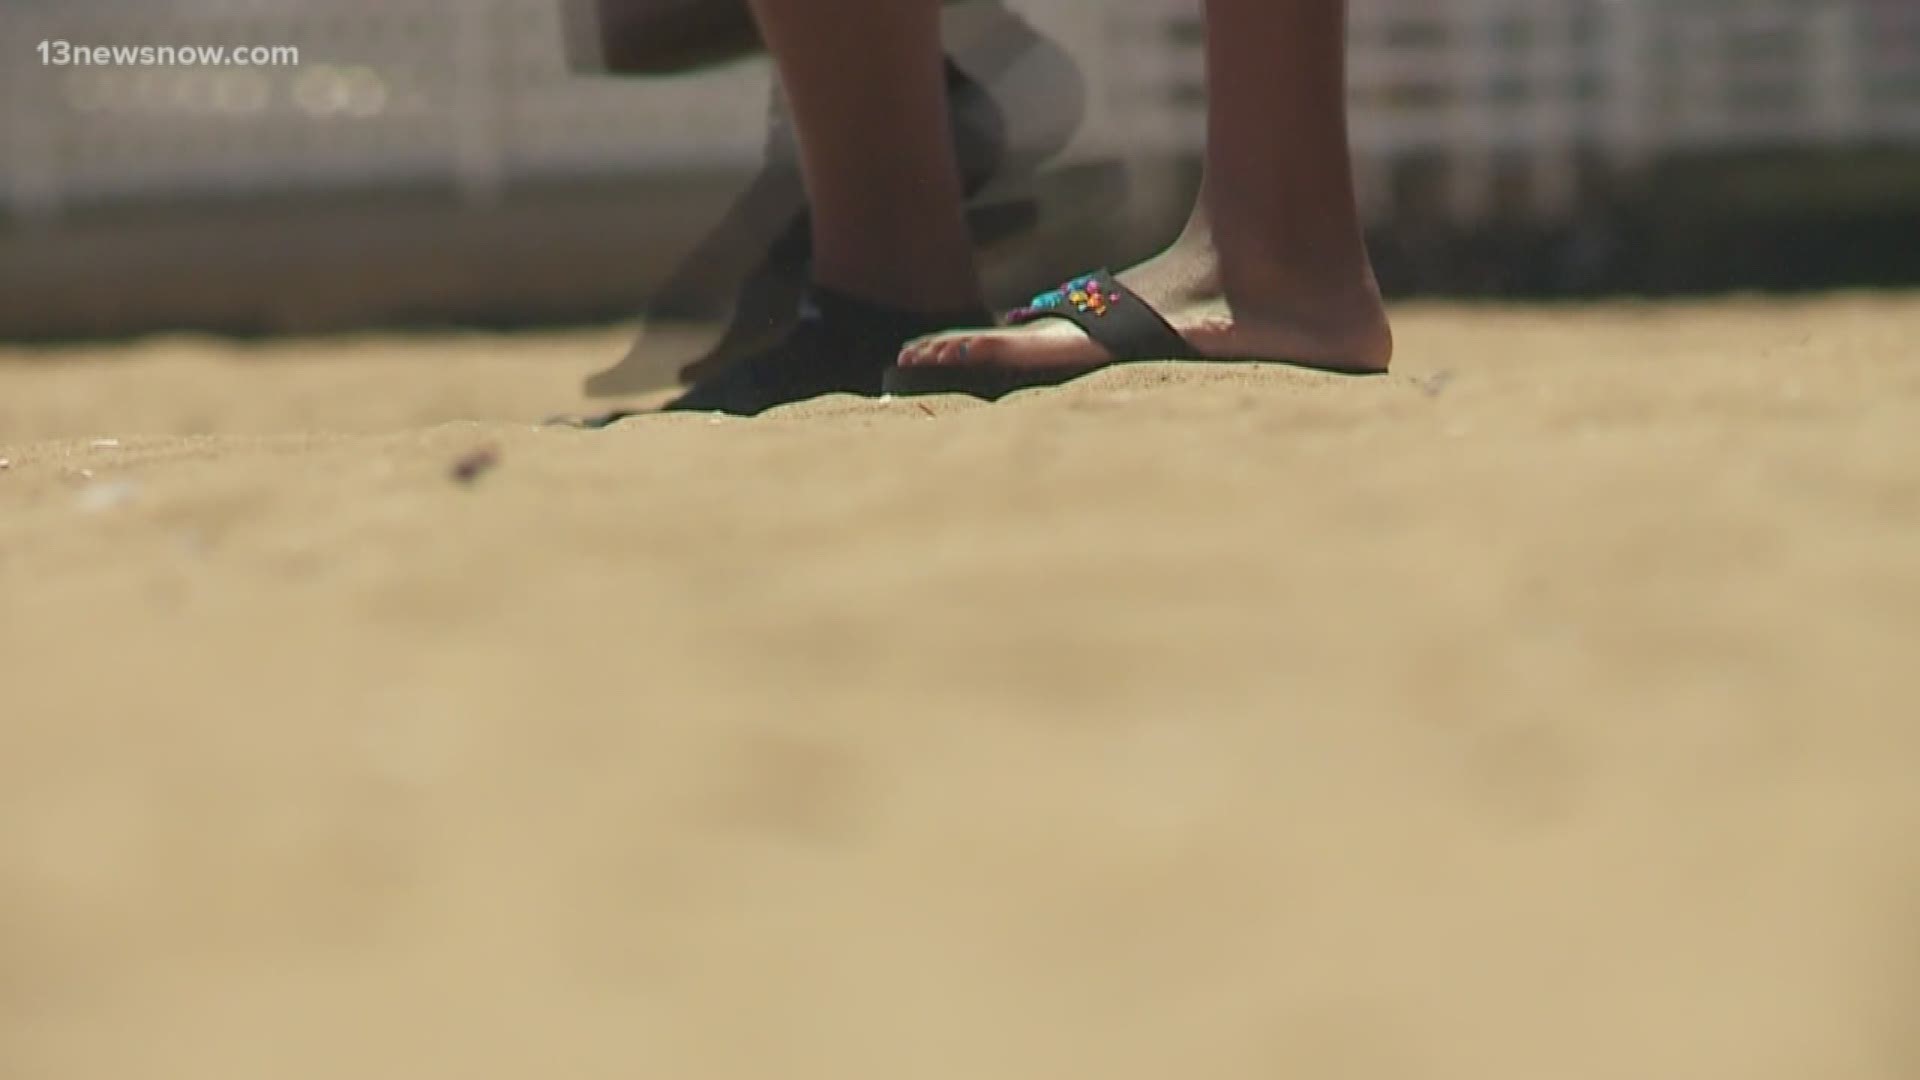 Sand can get so hot that it can burn the bottom of your feet. You should protect your feet to avoid burns. Lifeguards are on standby to help anyone who does get hurt.